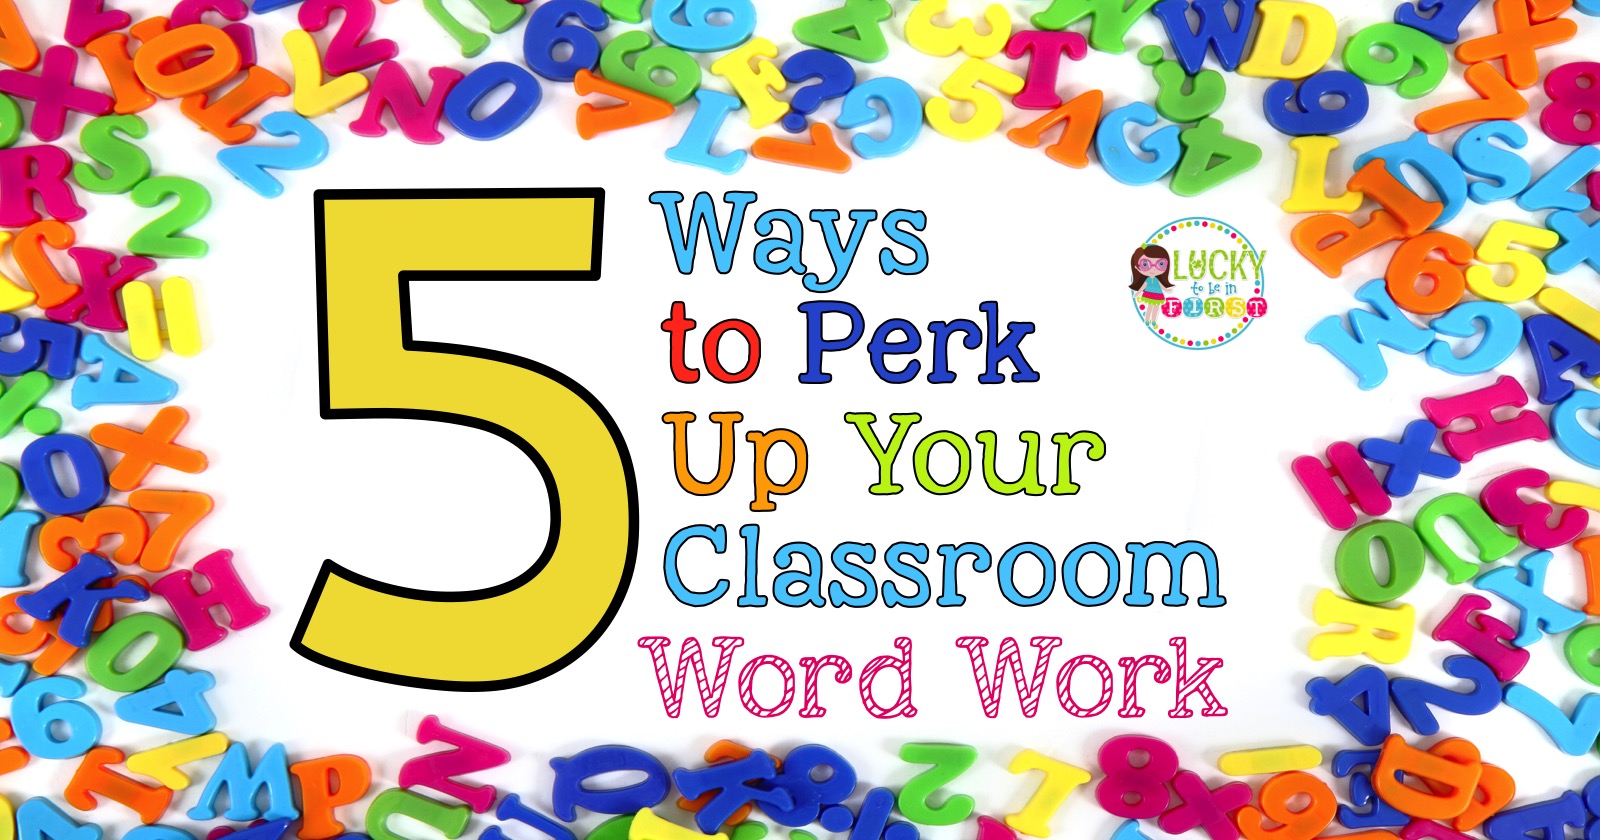 5-ways-to-perk-up-your-daily-5-word-work-daily-5-lucky-to-be-in-first-facebook